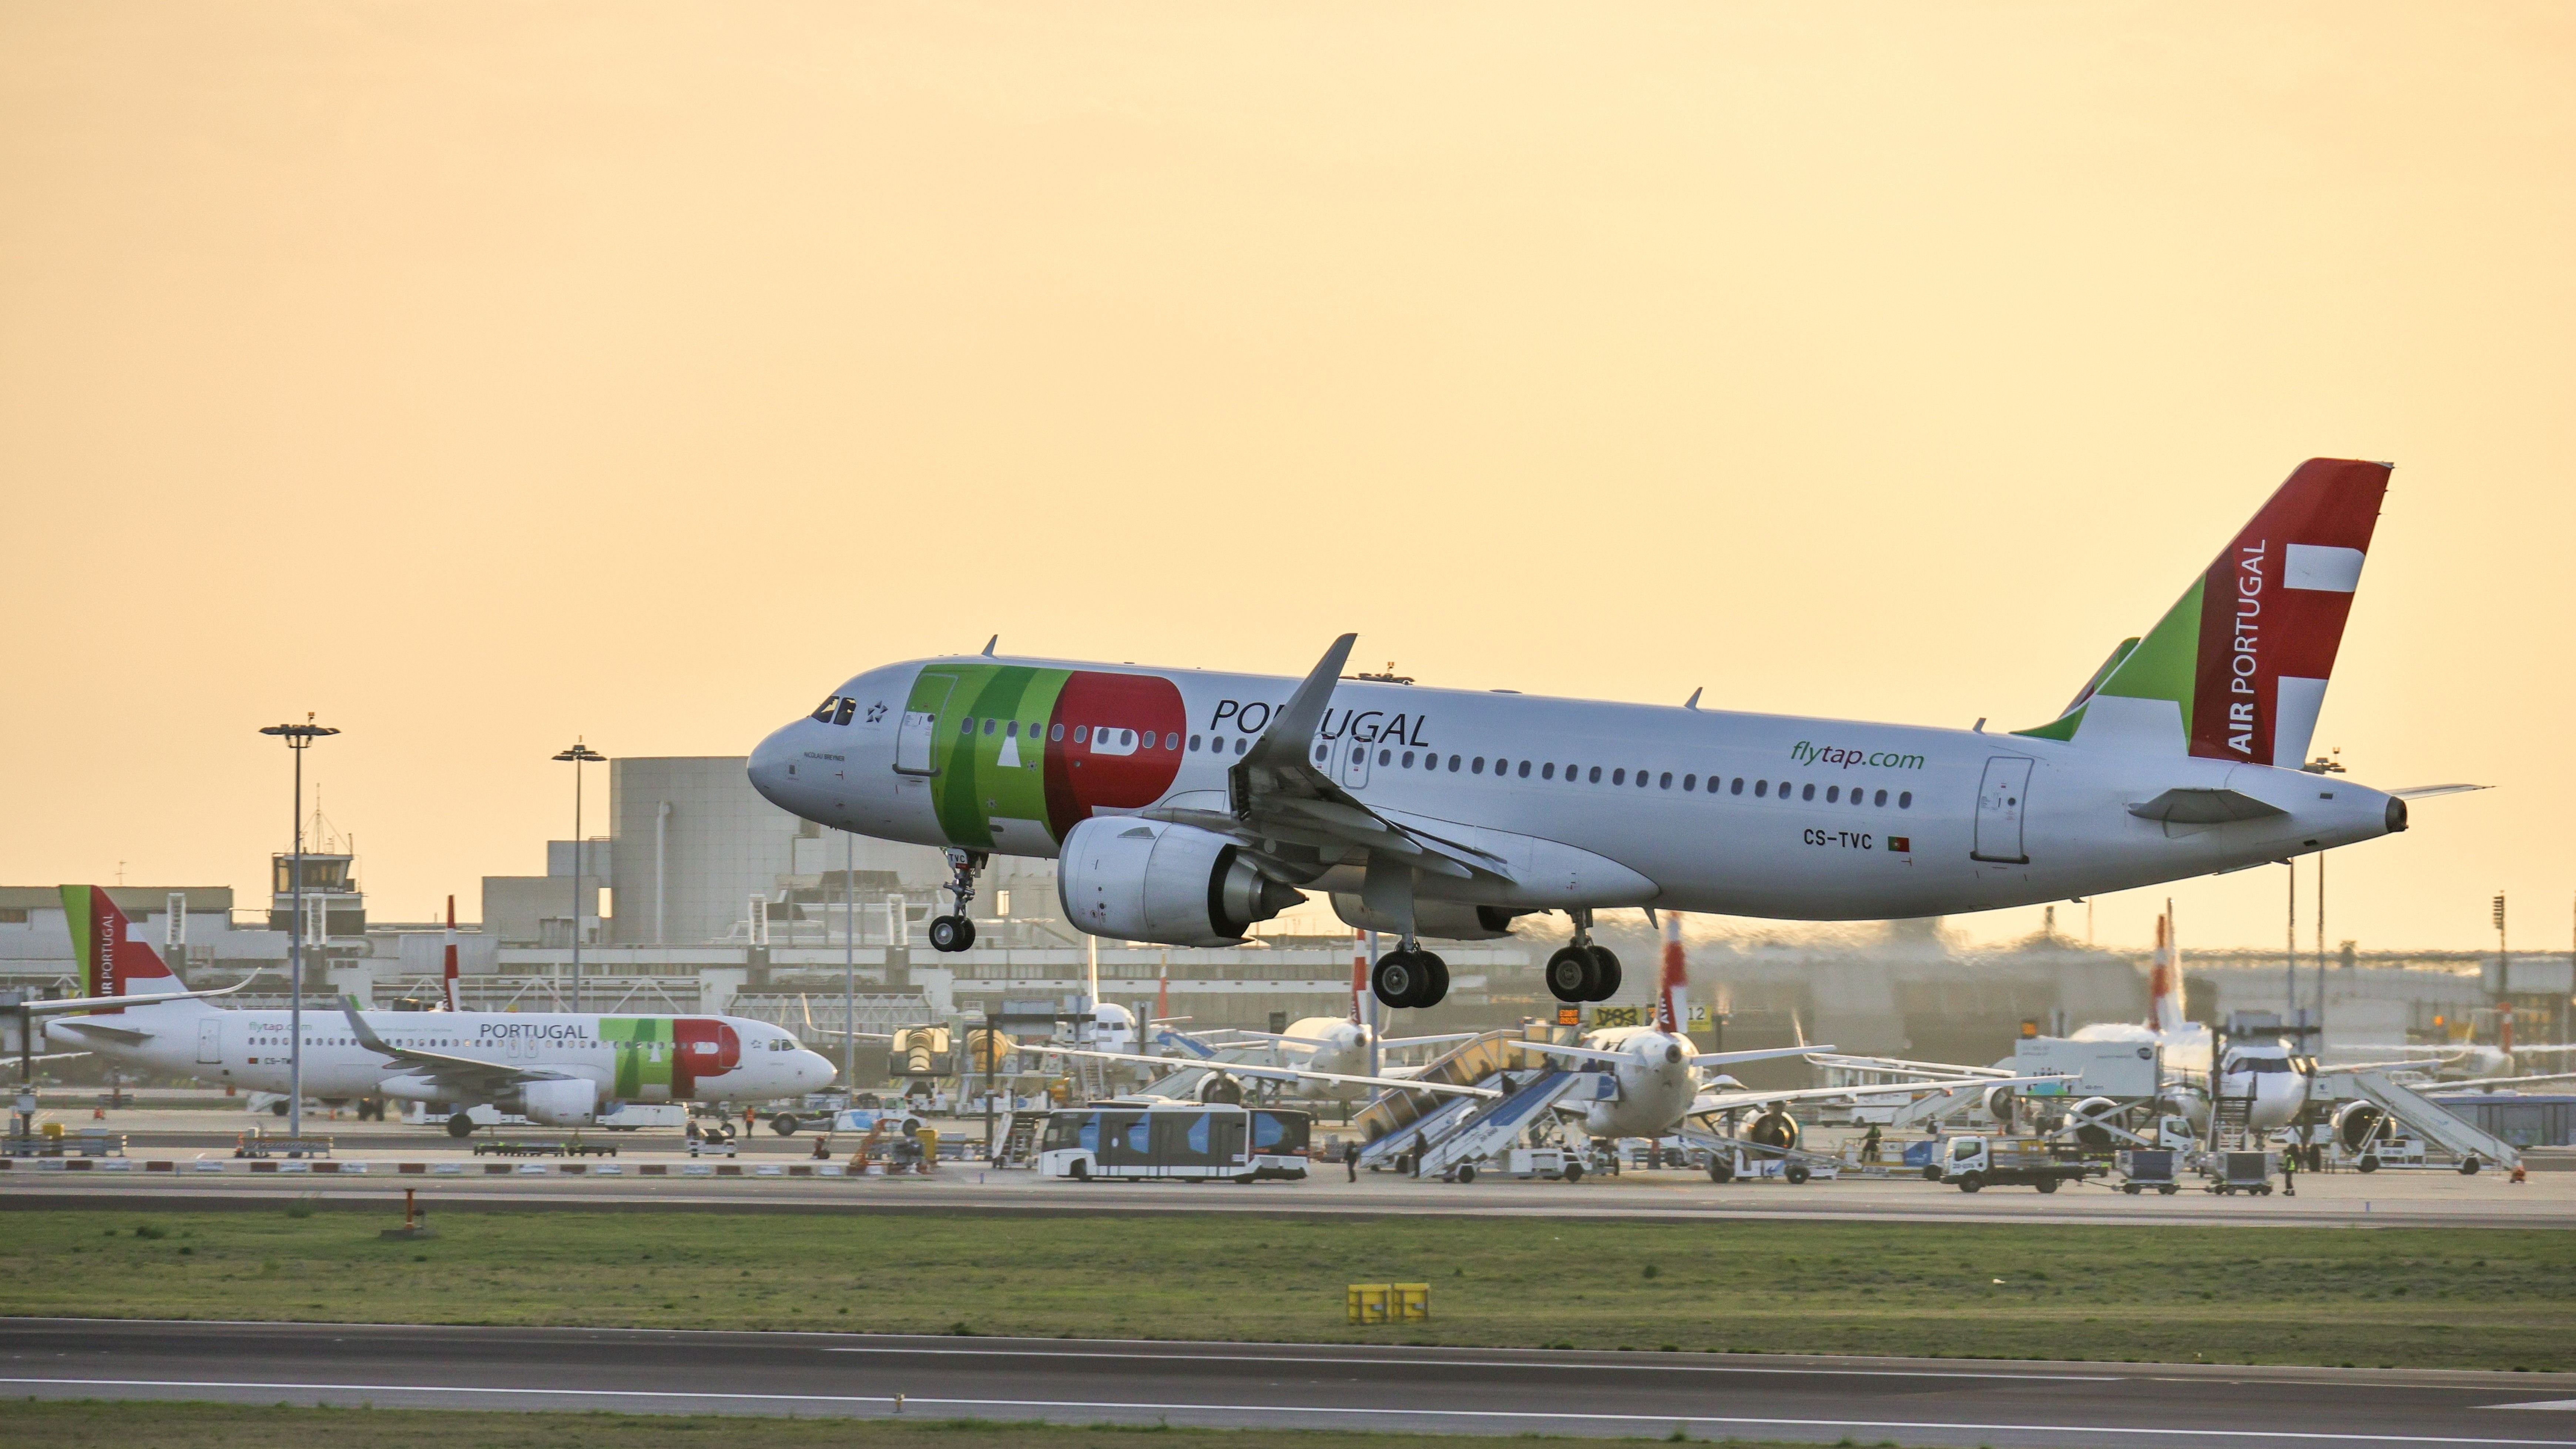 A side view of a TAP Air Portugal airplane departing from Humberto Delgado Airport at sunset.